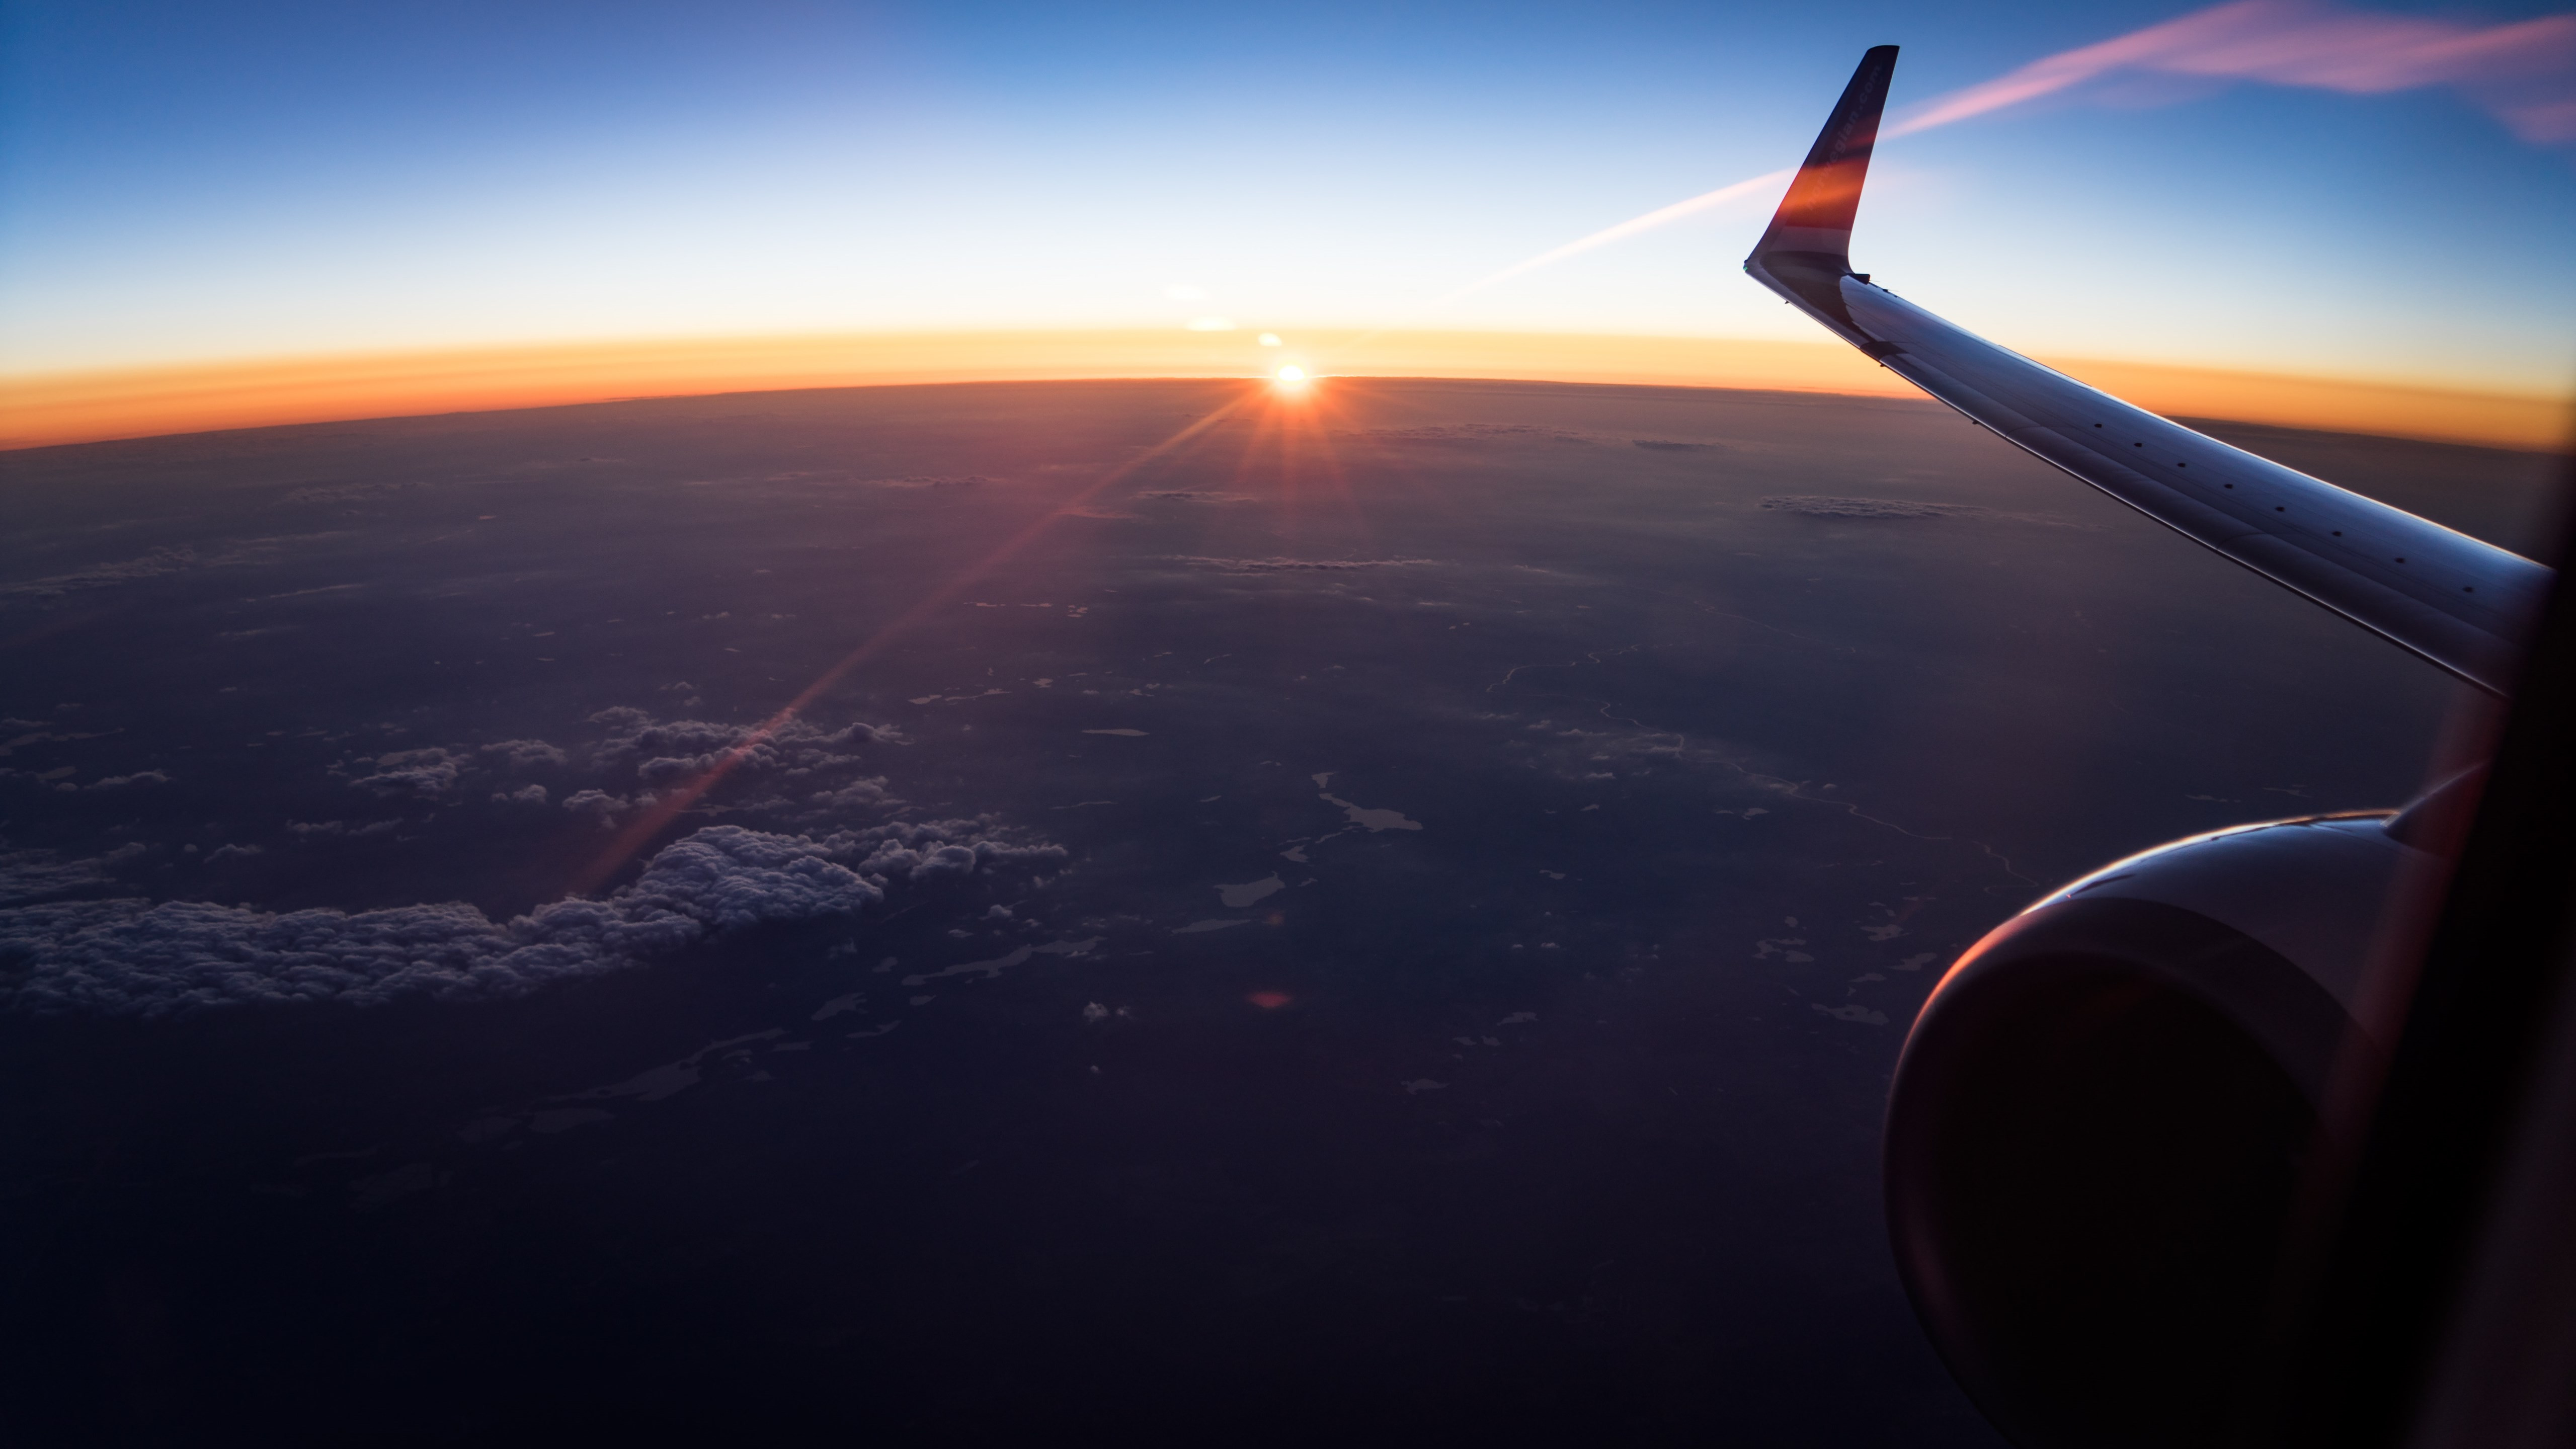 In the plane watching the sunset wallpaper 5120x2880